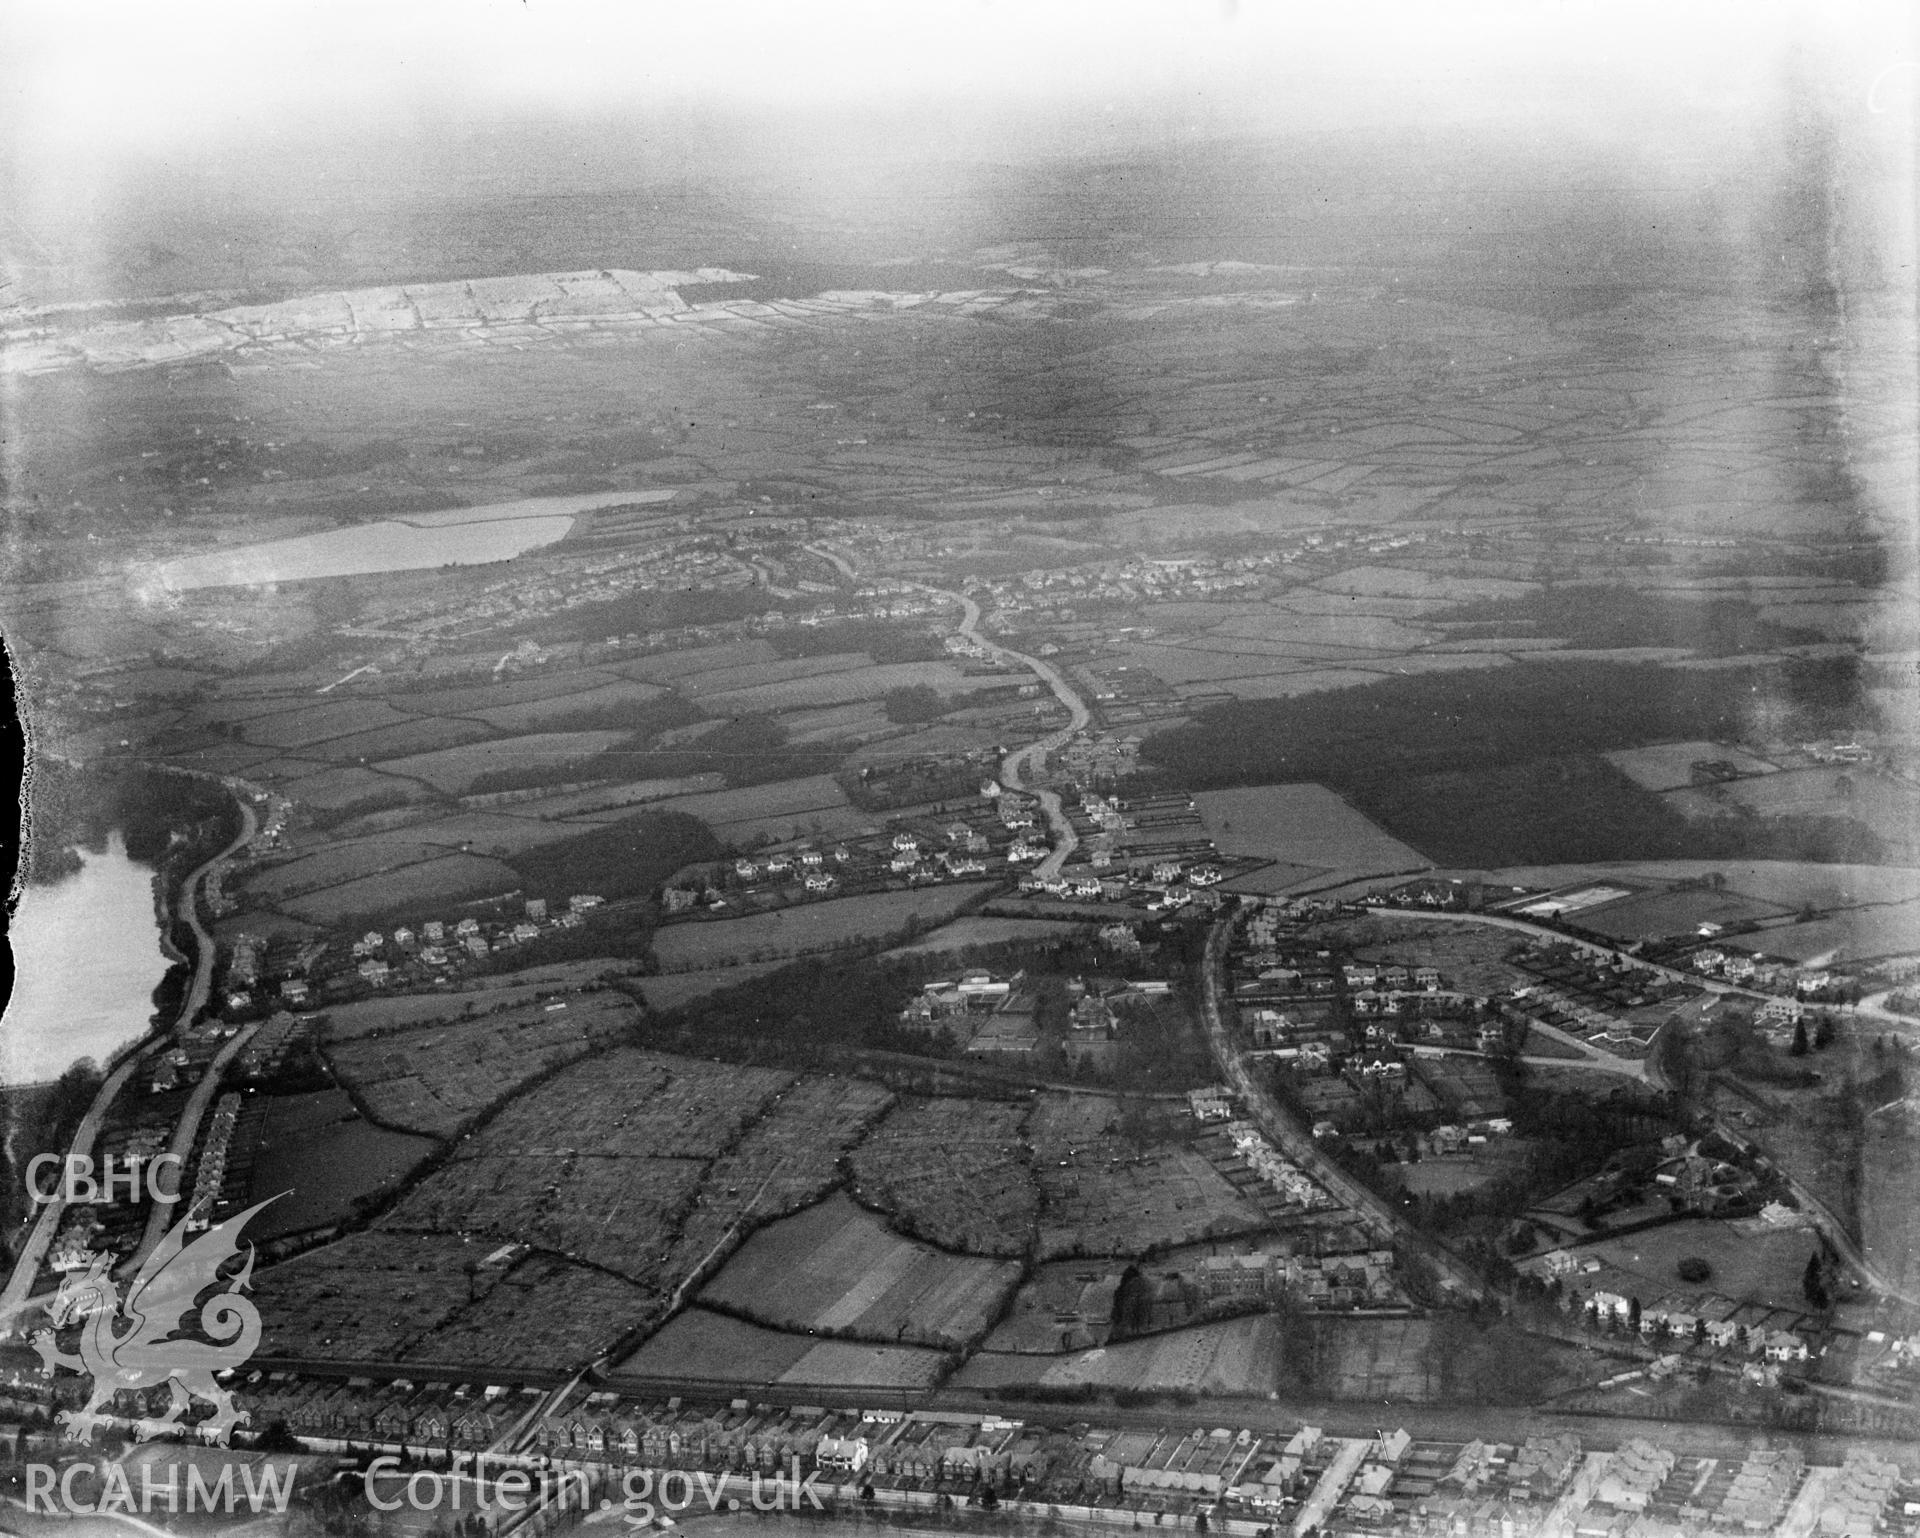 View of Cardiff showing Roath Park and Llanishen reservoir, oblique aerial view. 5?x4? black and white glass plate negative.